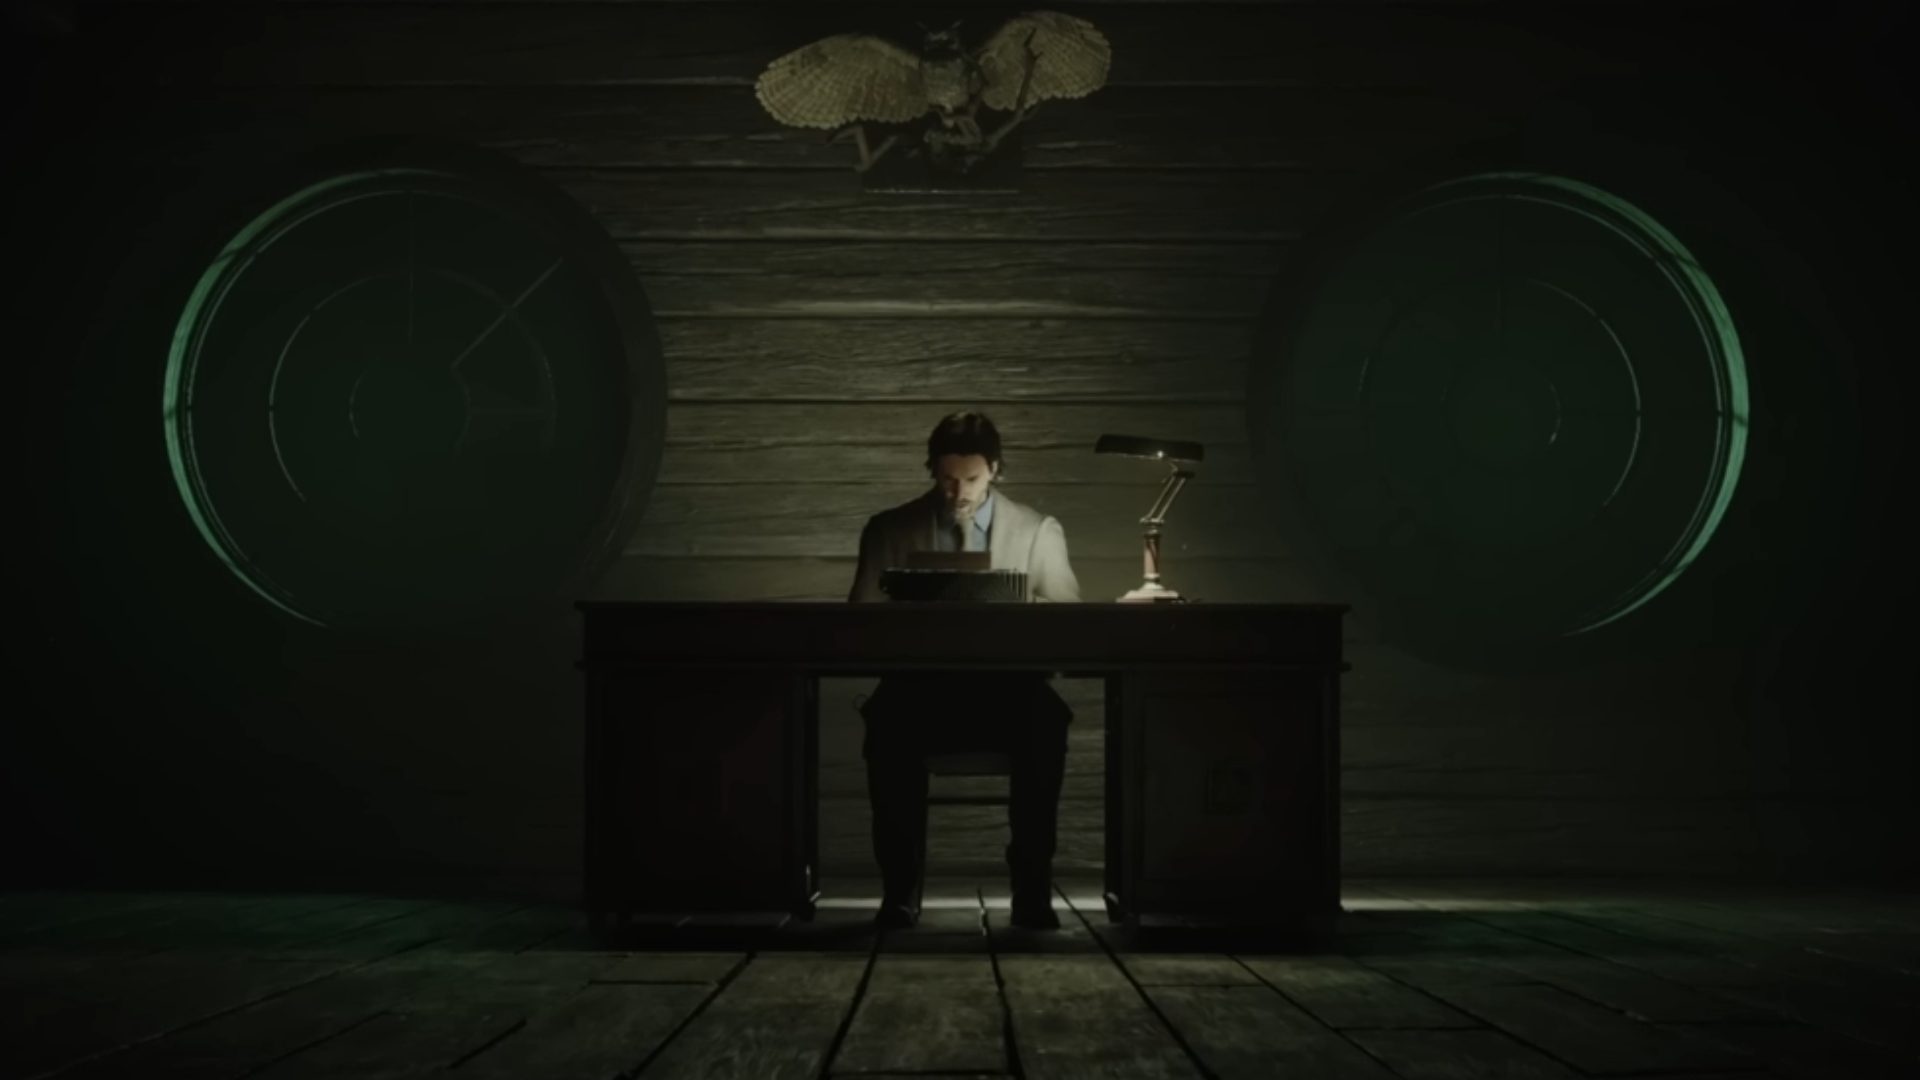 Alan Wake 2 Ending Explained: Is Alan Still in the Dark Place